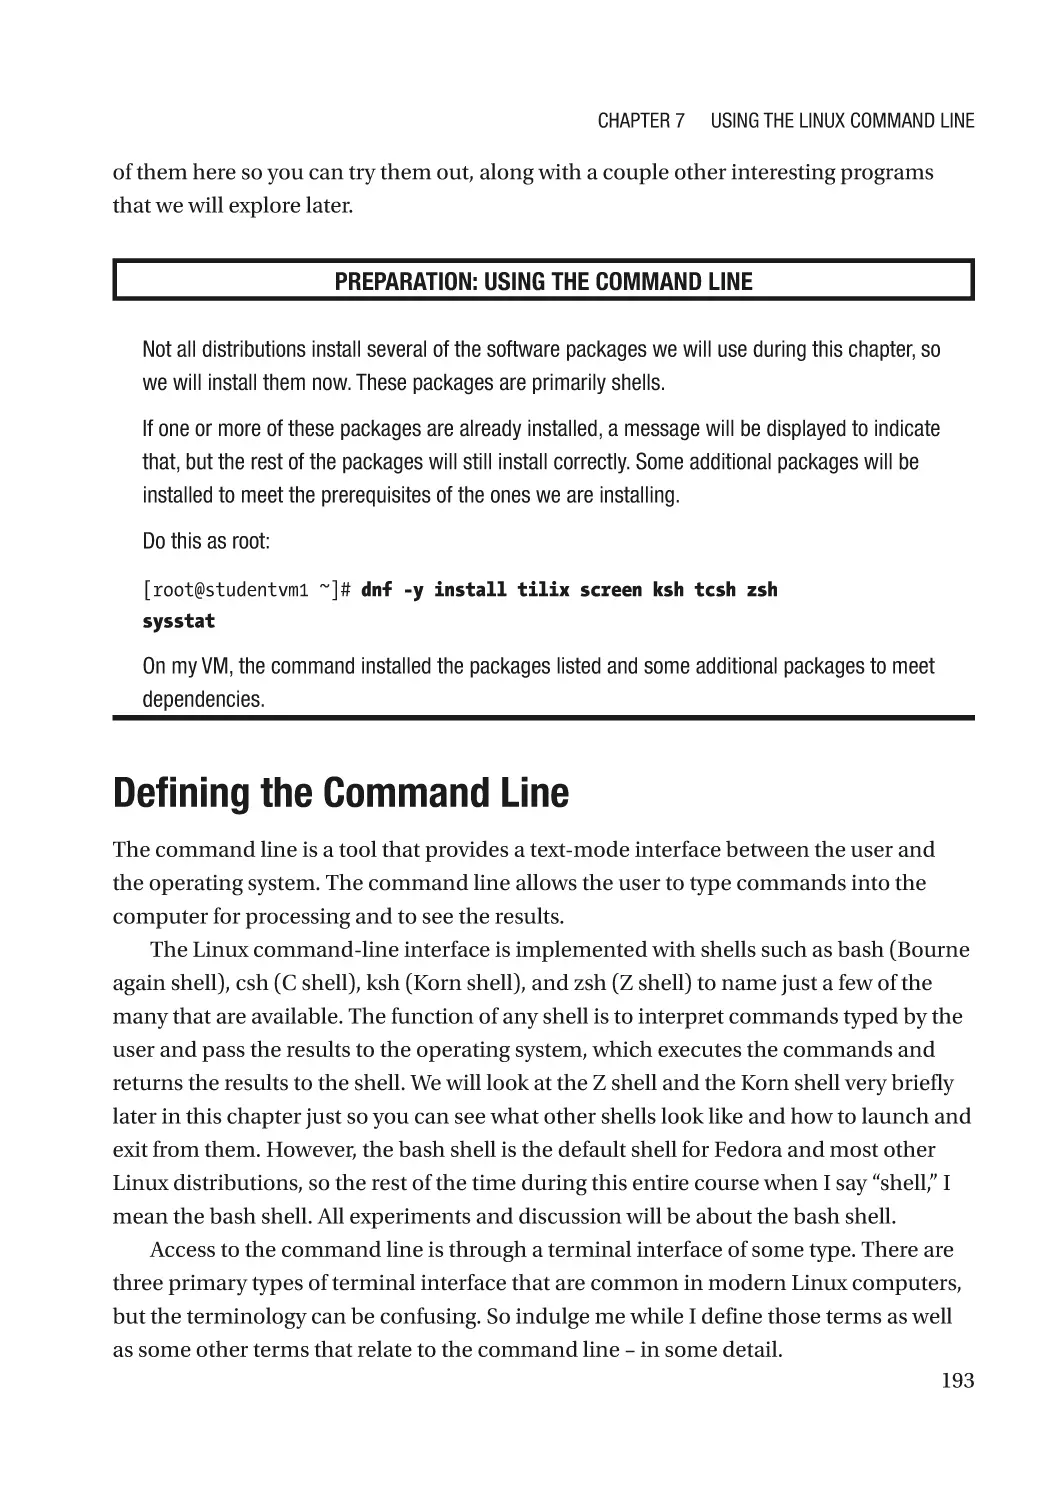 Defining the Command Line